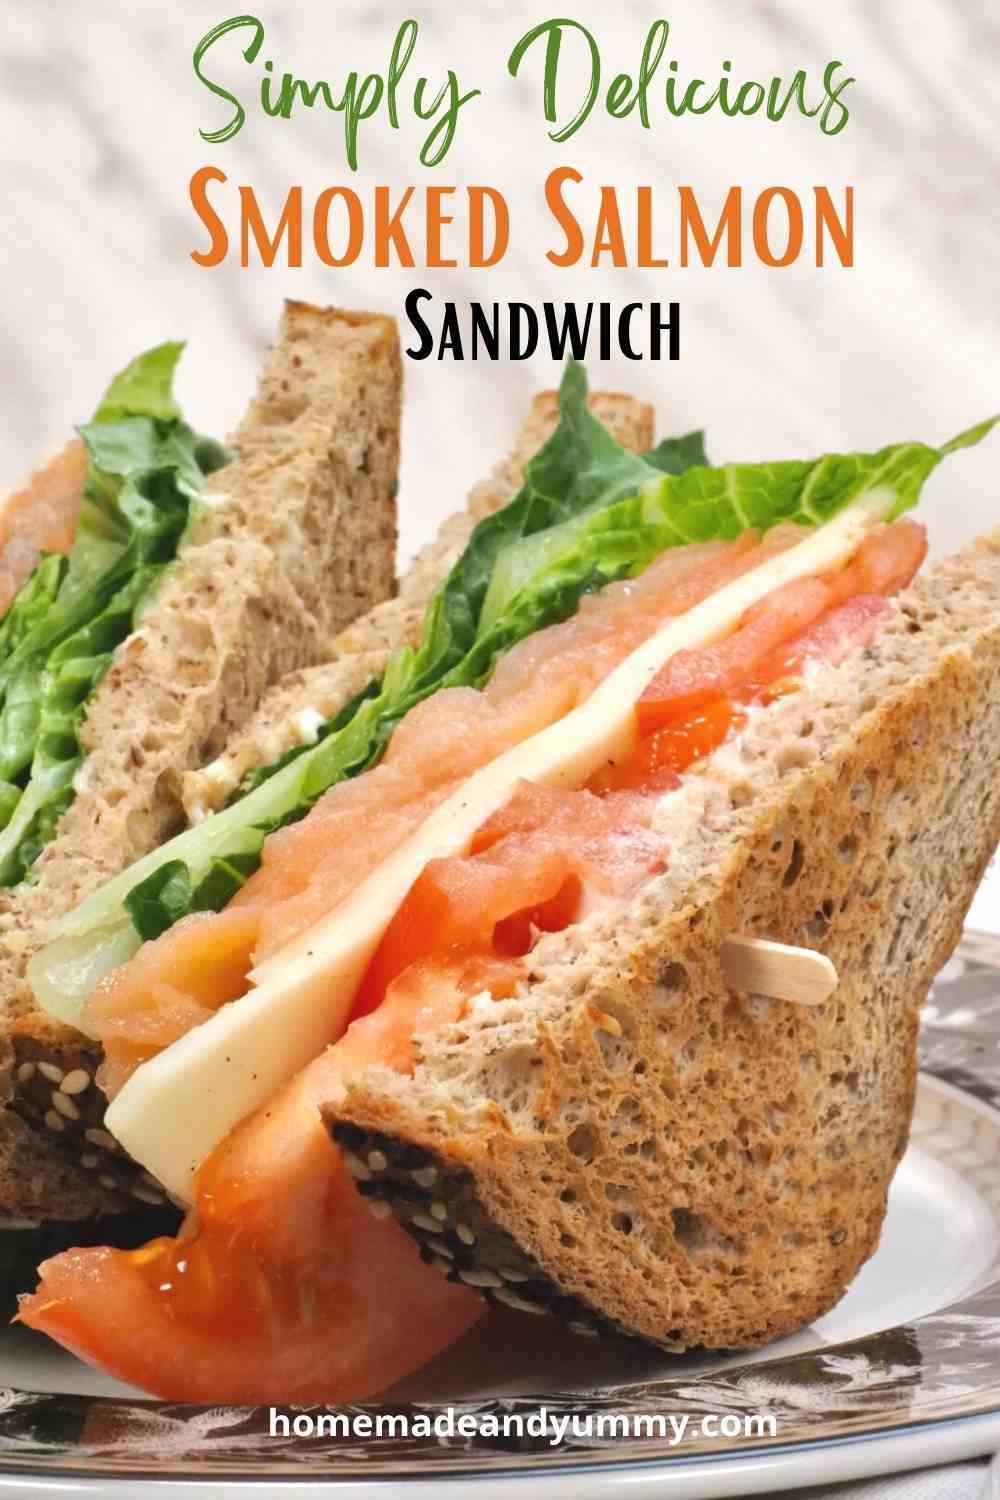 Simple sandwich elevated with cold smoked salmon.